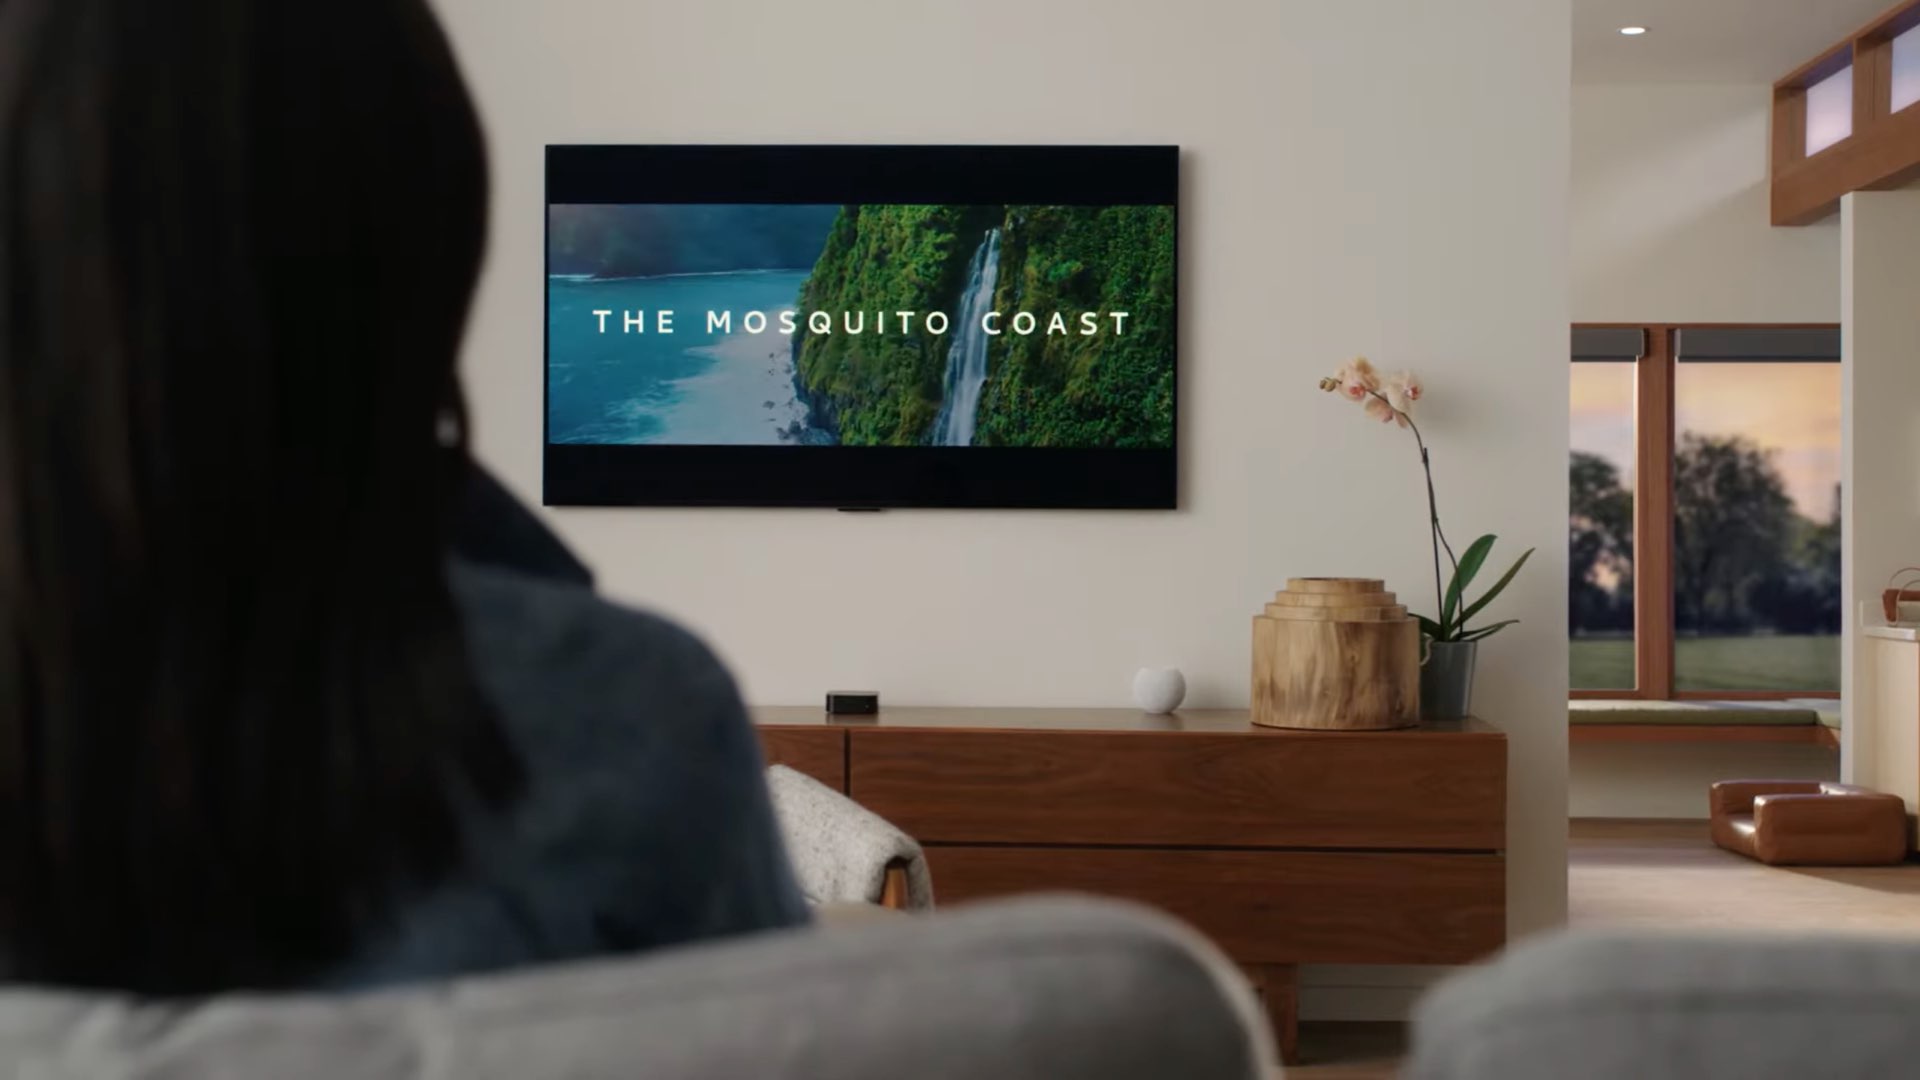 An image showing a person sitting on a couch and watching "Mosquito Coast" on their Apple TV with HomePod mini next to it